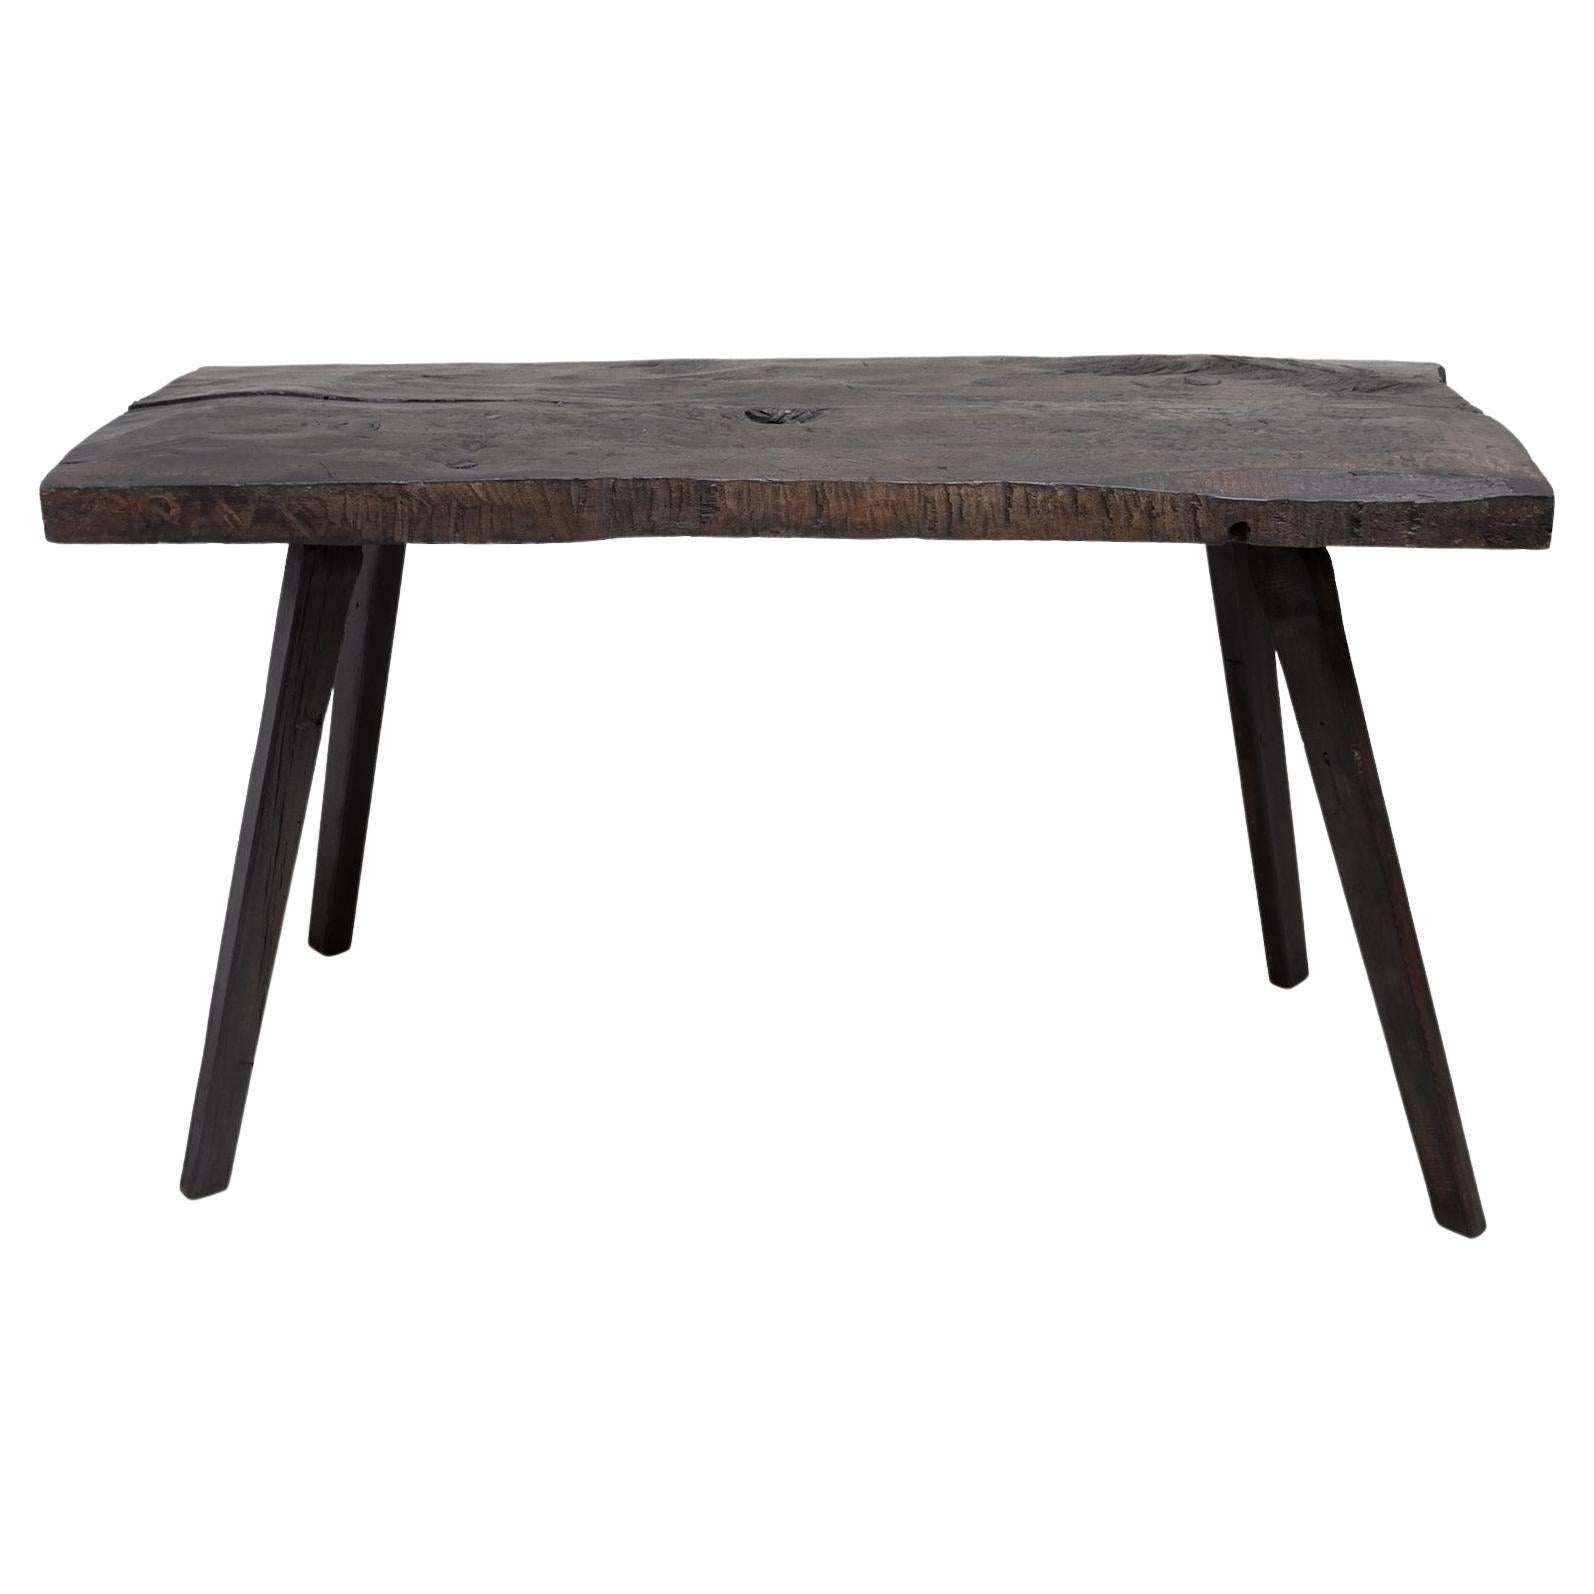 19th Century Hewn Beech Transylvanian Mountain Table For Sale